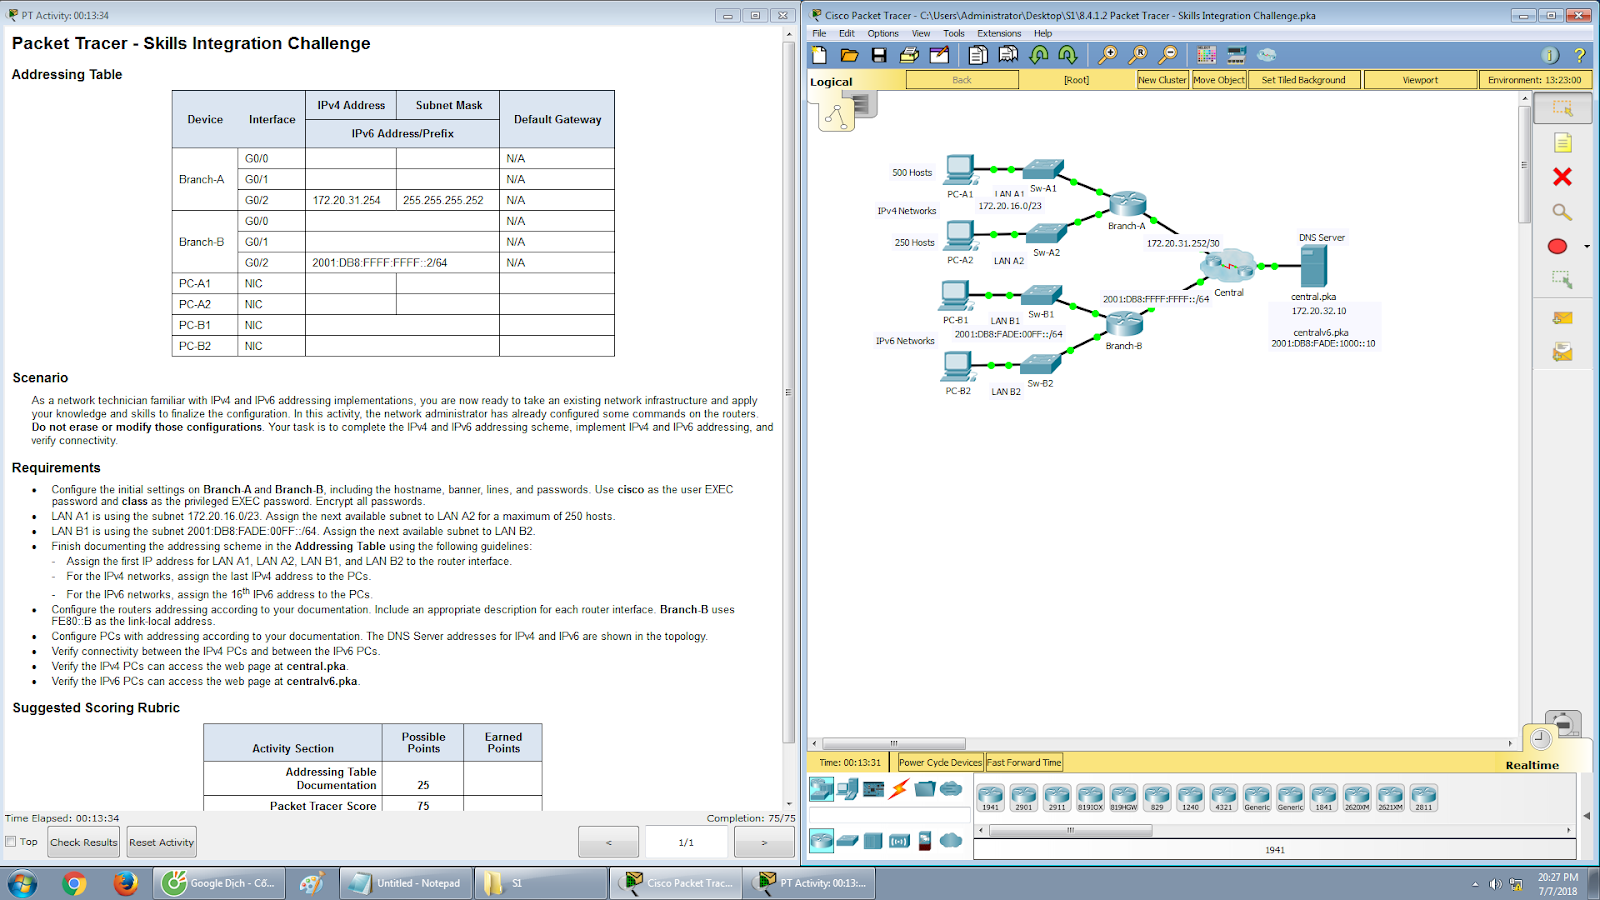 completed packet tracer 8.4.1.2